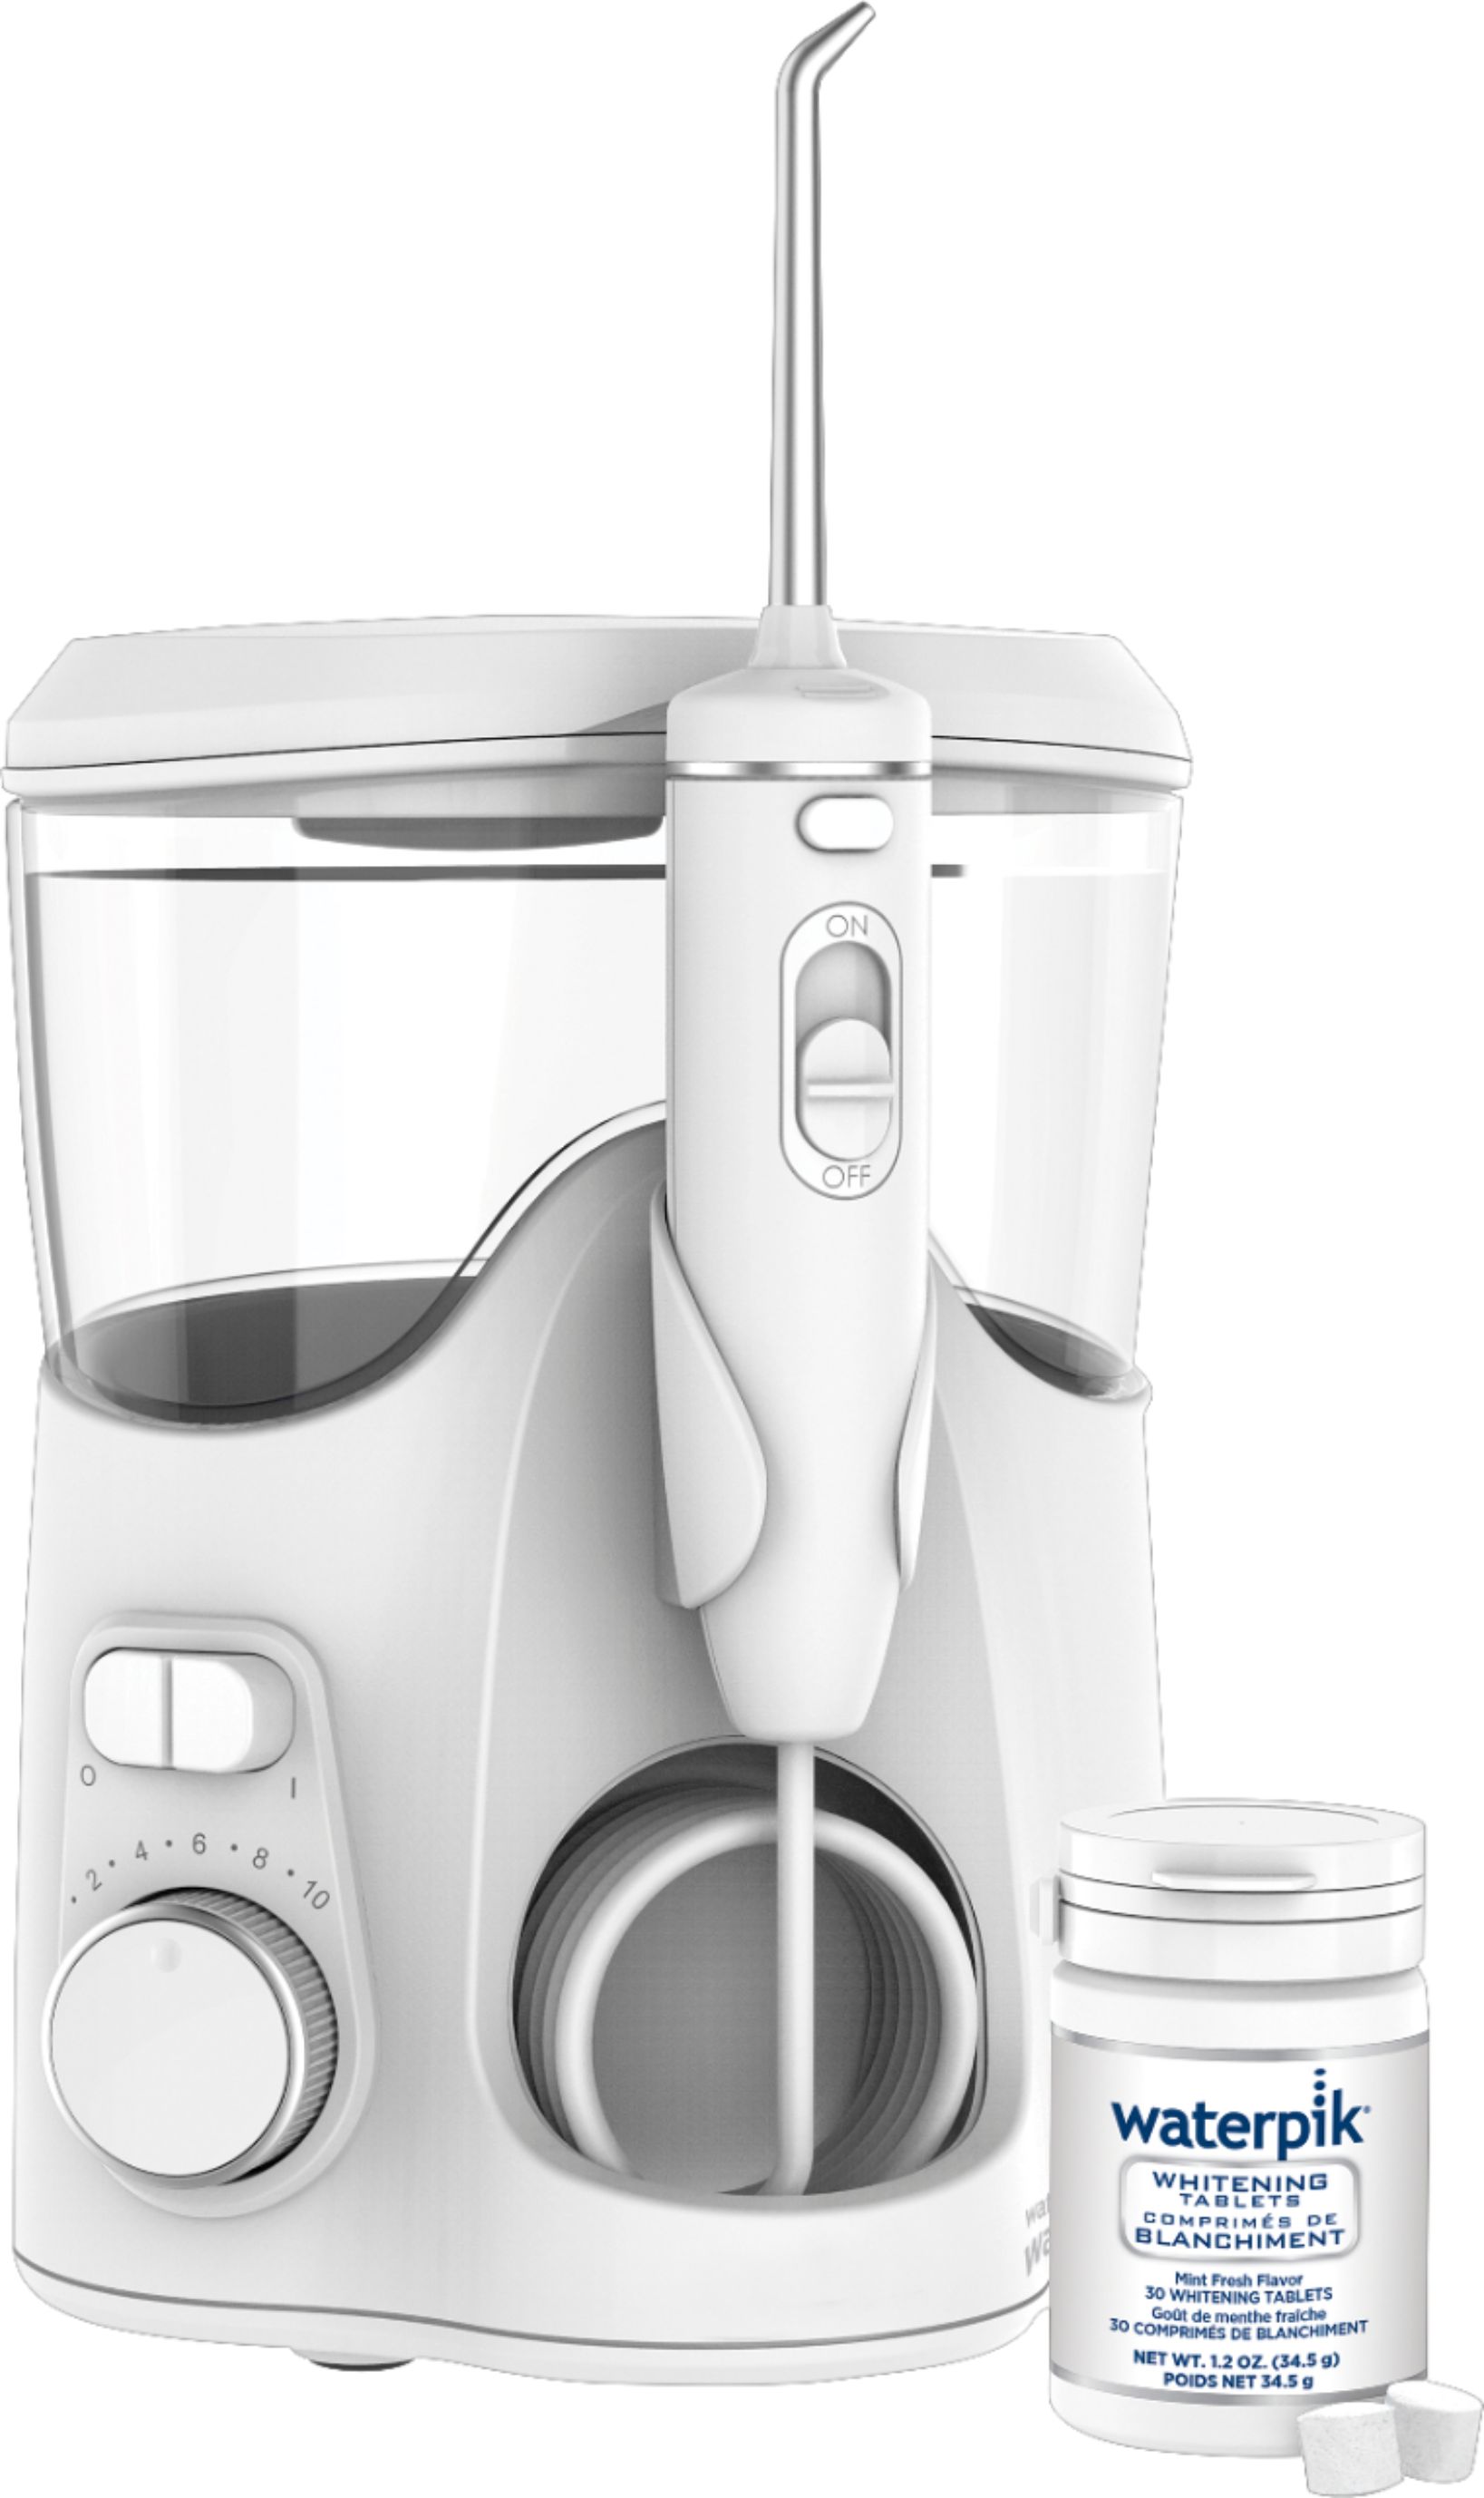 Angle View: Waterpik - Whitening Water Flosser - White With Chrome Accents